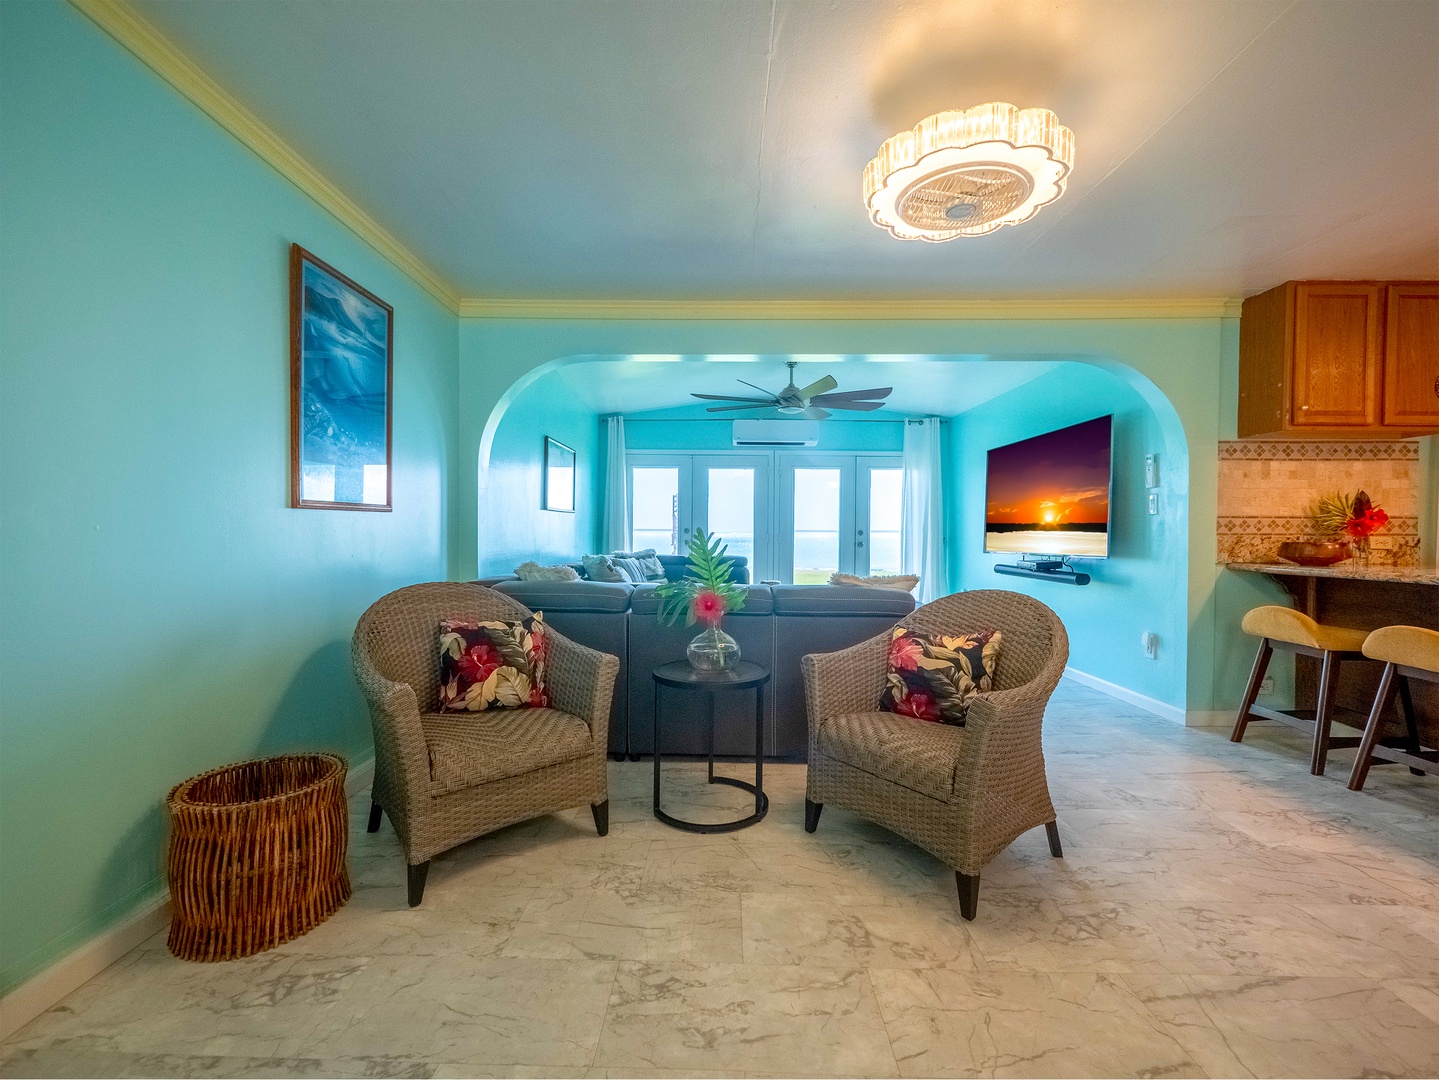 Hauula Vacation Rentals, Paradise Reef Retreat - Whether working in the office nook, challenging someone at the card table, or sinking into a movie, luxury and versatility await.